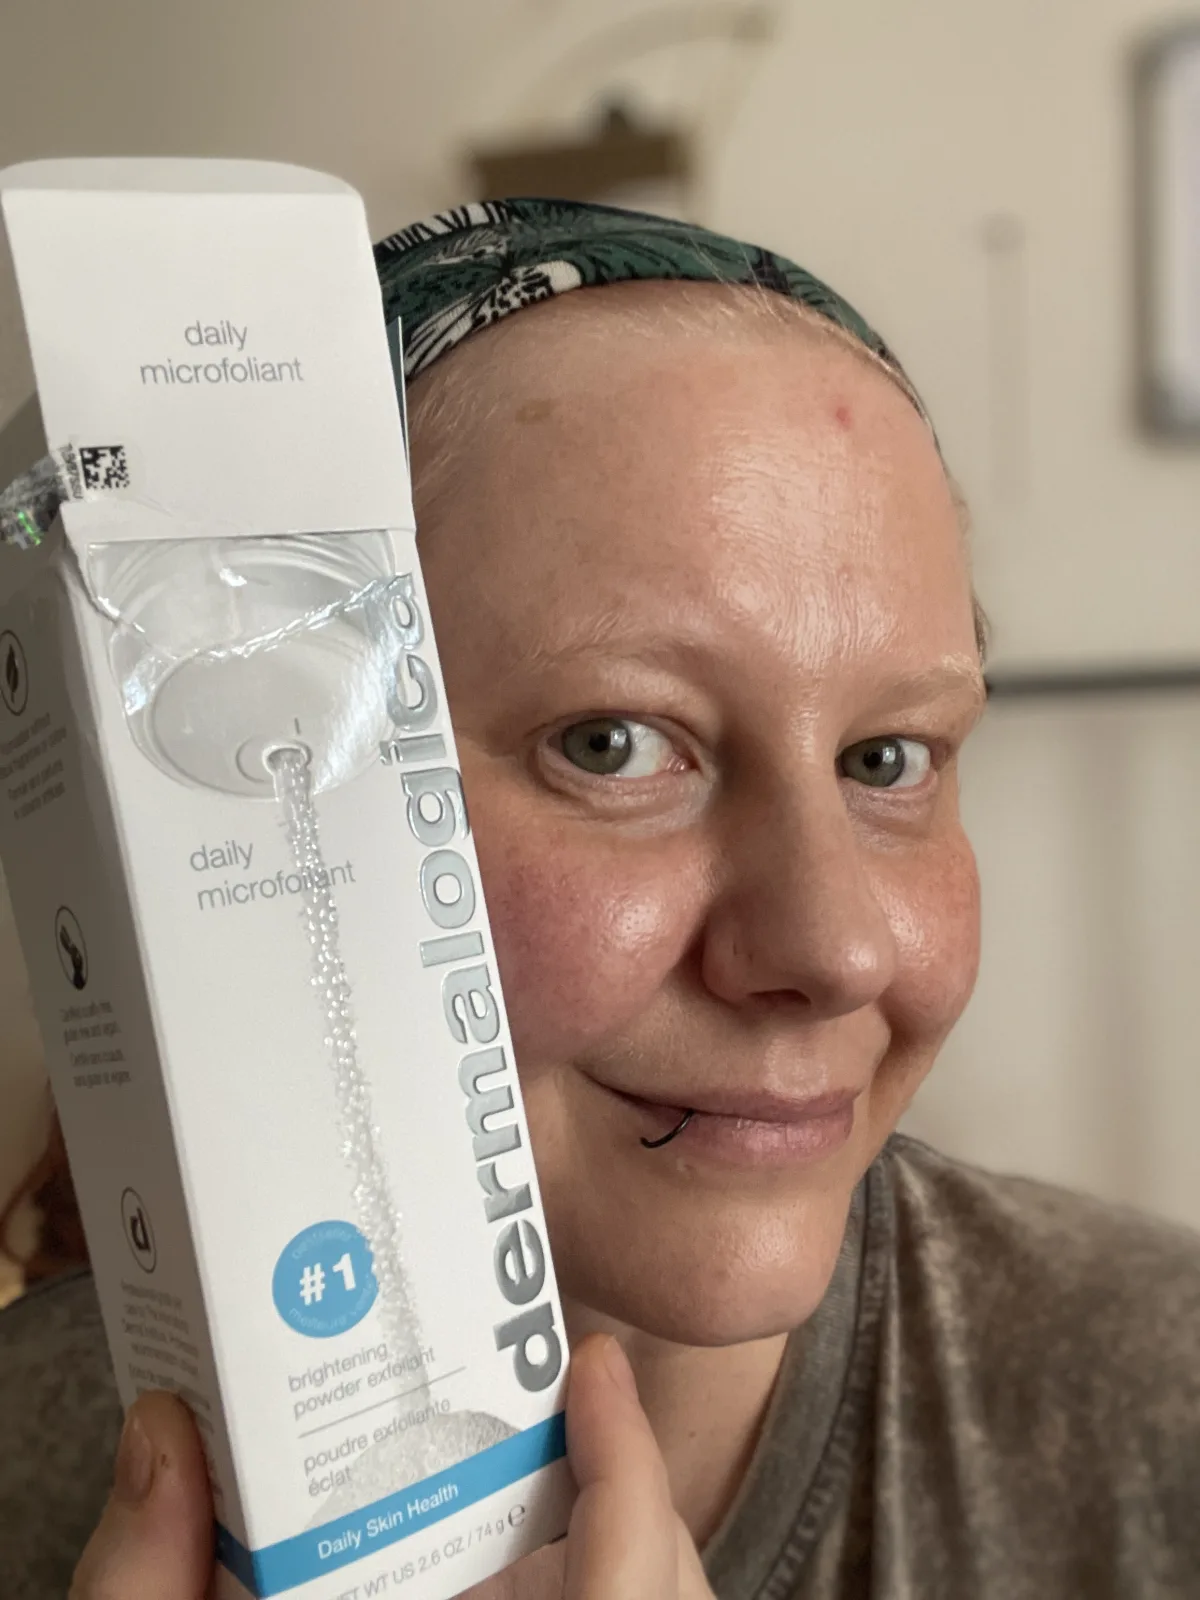 Dermalogica Skin Health Daily Microfoliant - review image